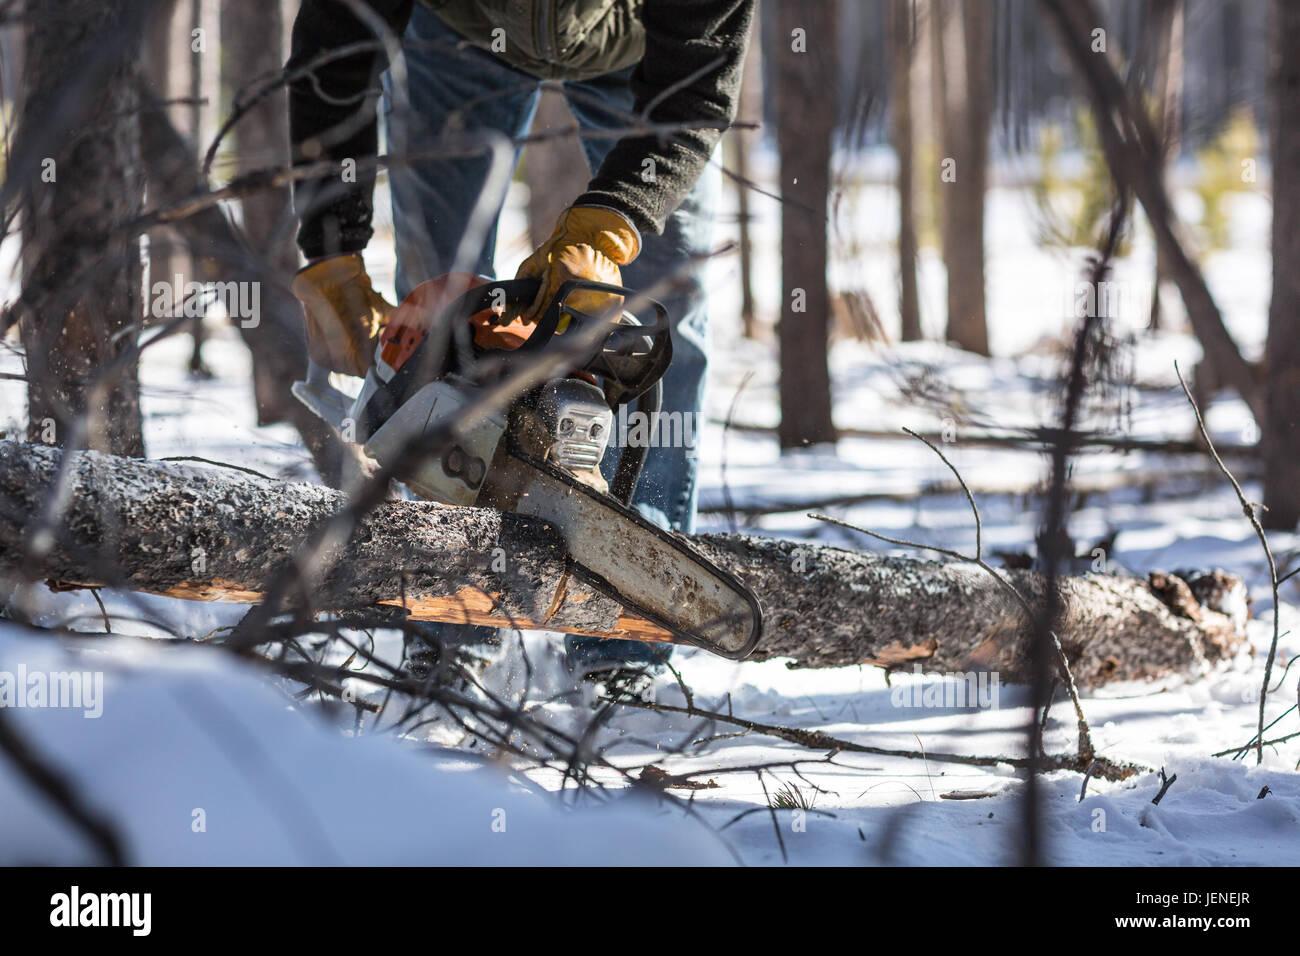 Man cutting firewood with chainsaw in winter Stock Photo